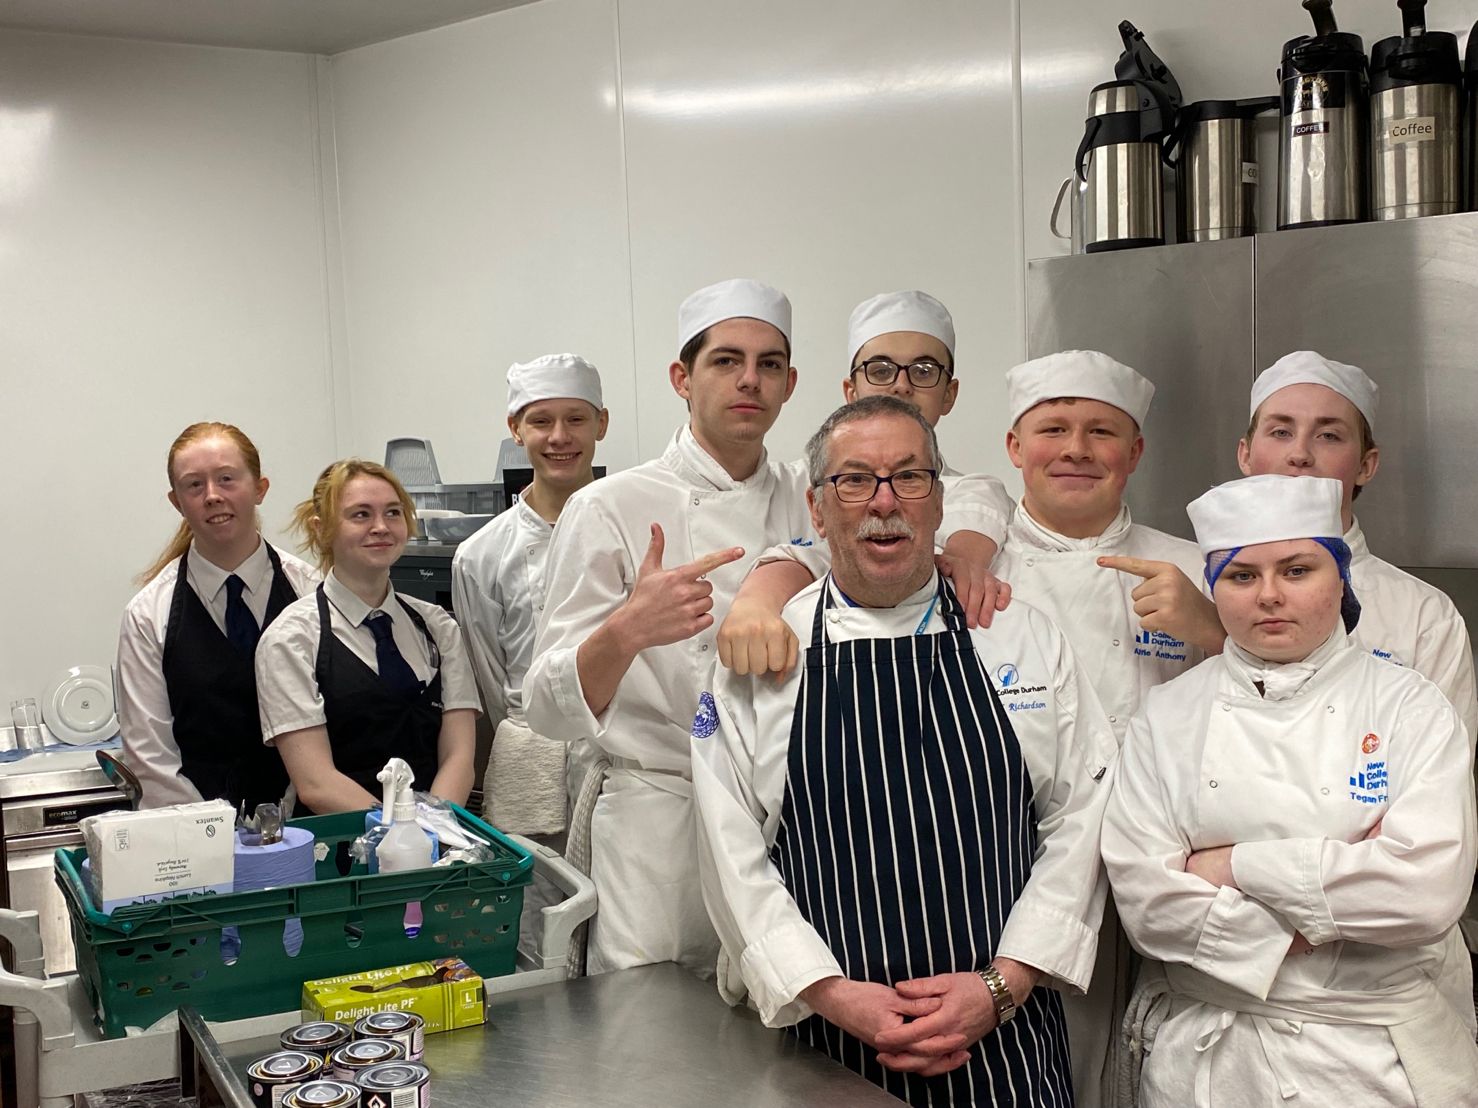 Professional cookery students